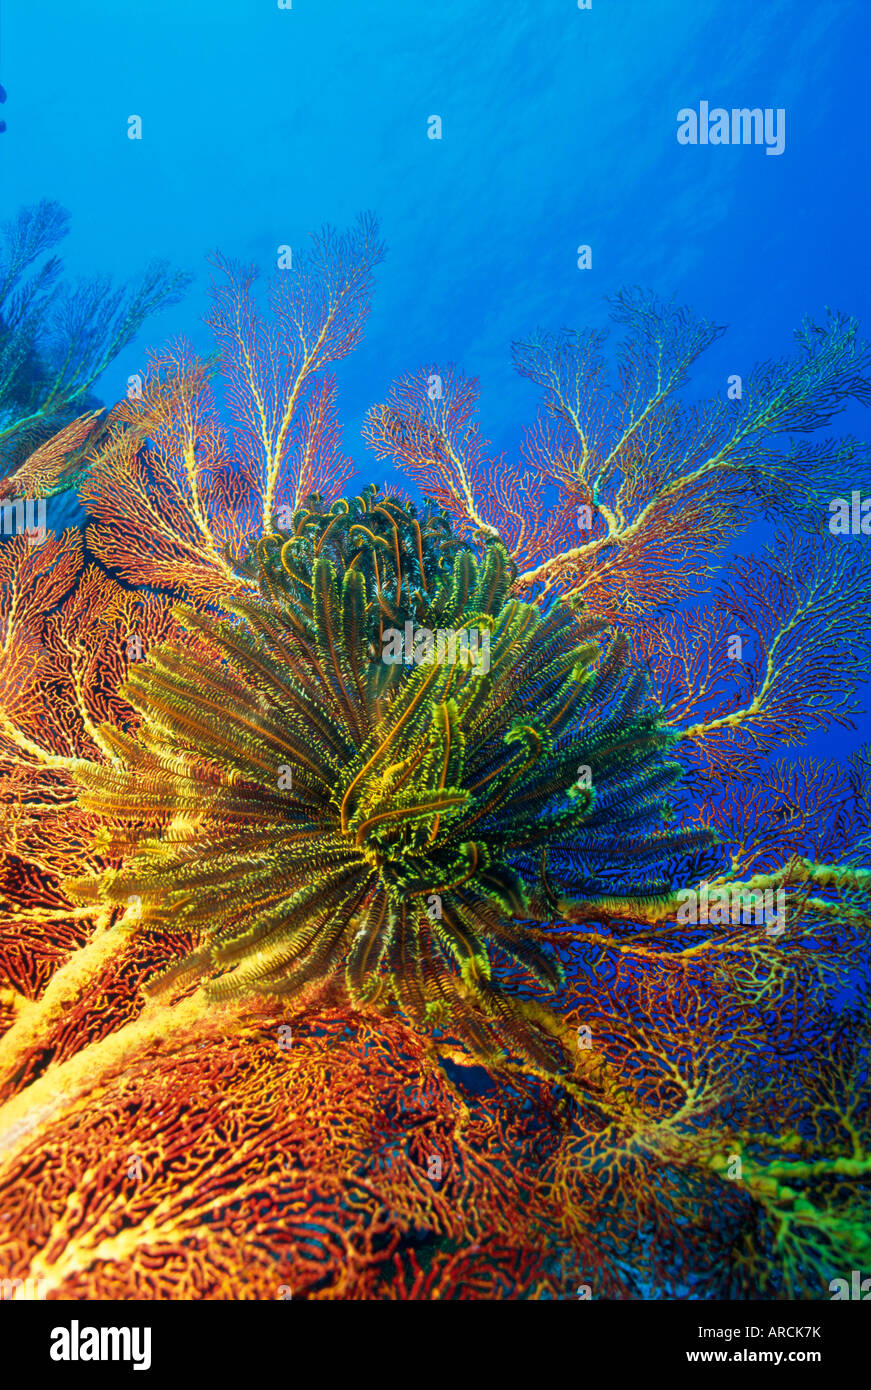 Featherstars perch on the edge of Gorgonian Sea Fans to feed in the current, Fiji, Pacific Ocean Stock Photo